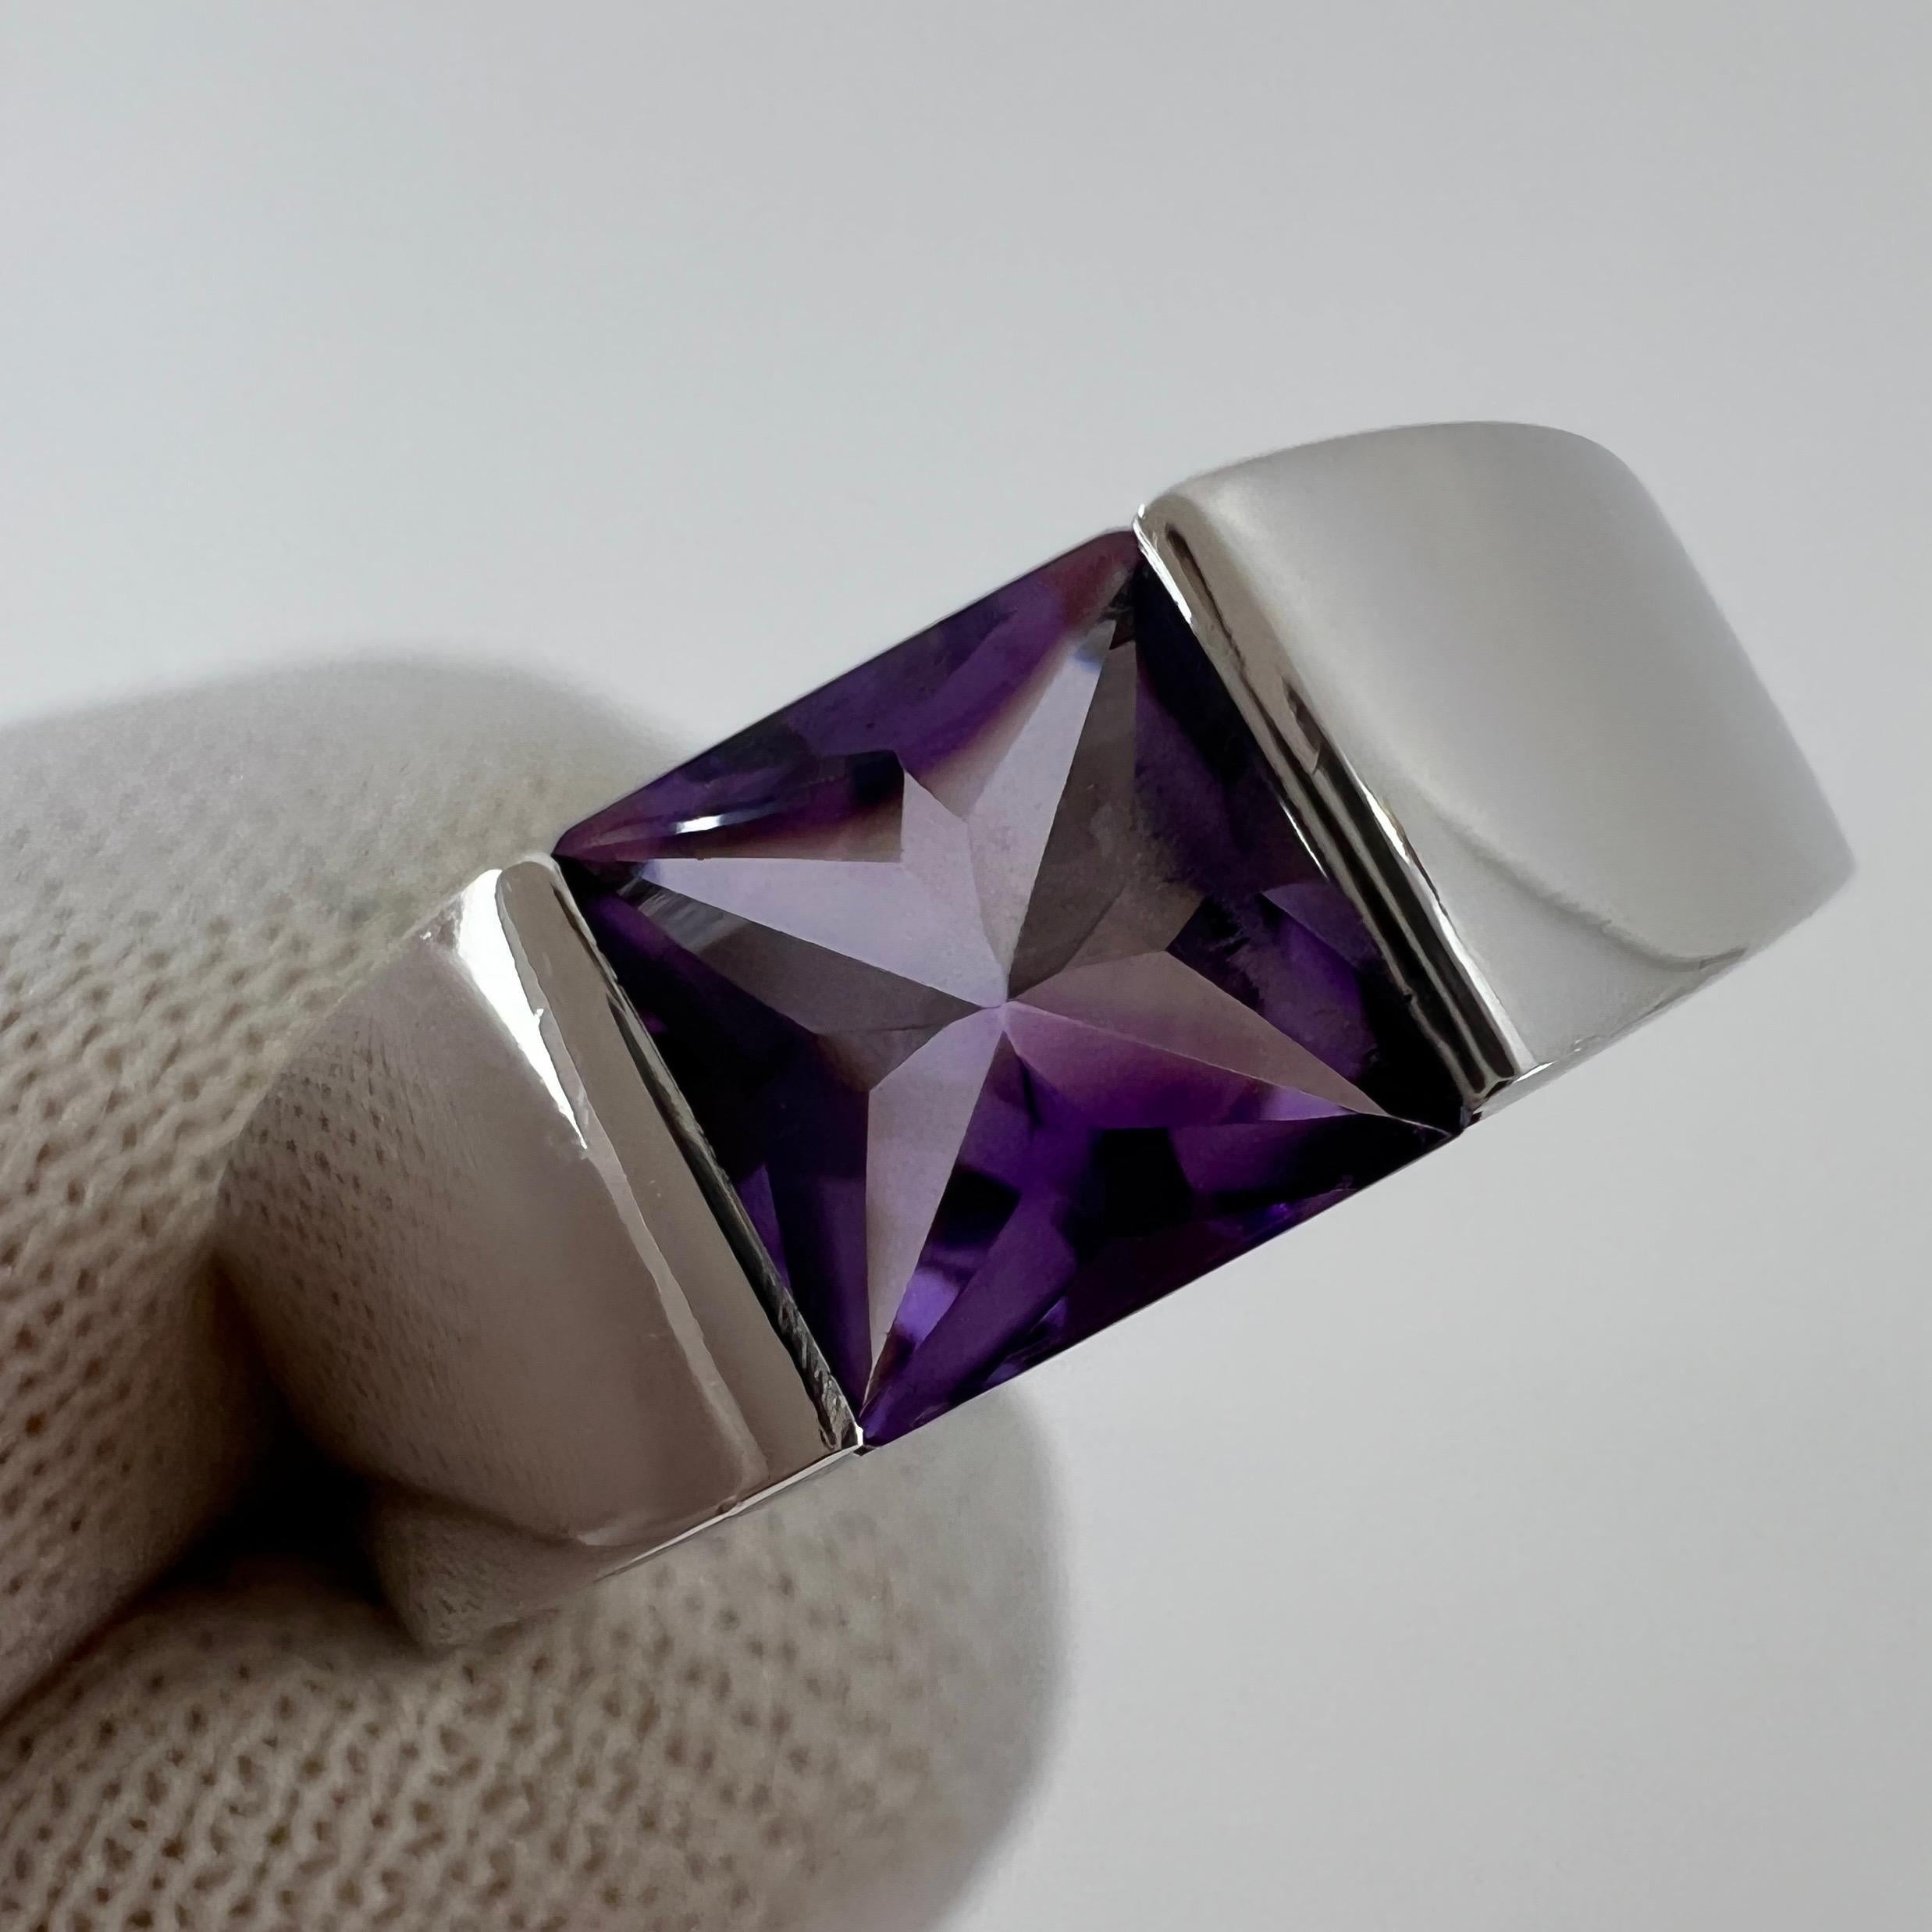 Cartier Purple Amethyst 18 Karat White Gold Tank Ring.

Stunning white gold ring with a fine 6mm tension set deep purple amethyst. Fine jewellery houses like Cartier only use the finest of gemstones and this amethyst is no exception. A top amethyst